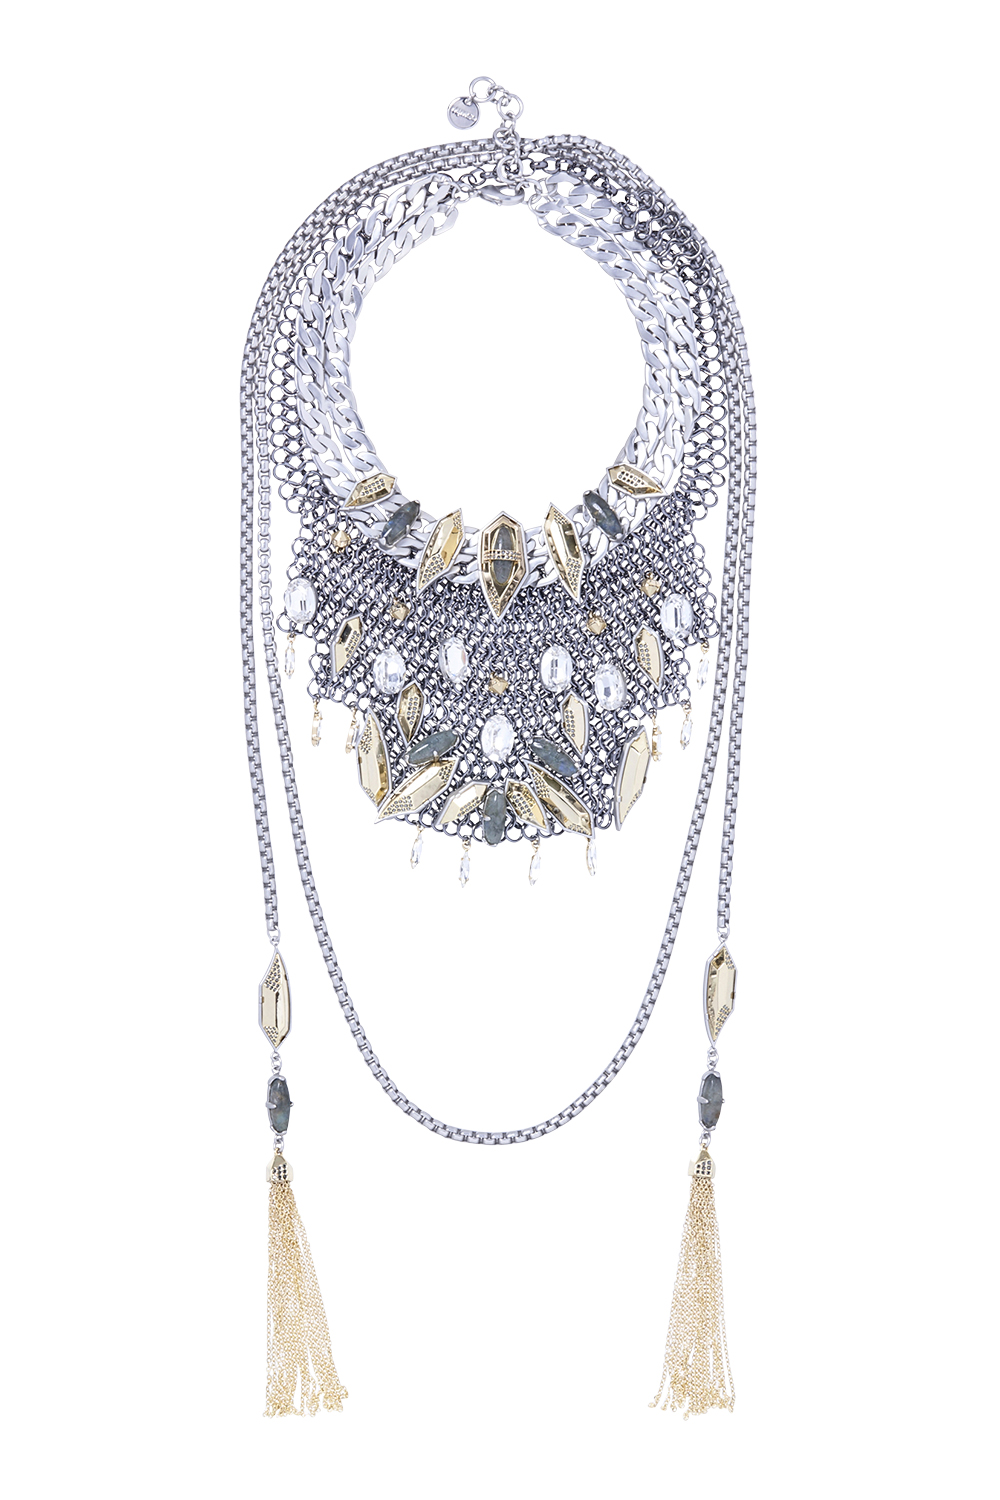 Necklace, $499, by Mimco.